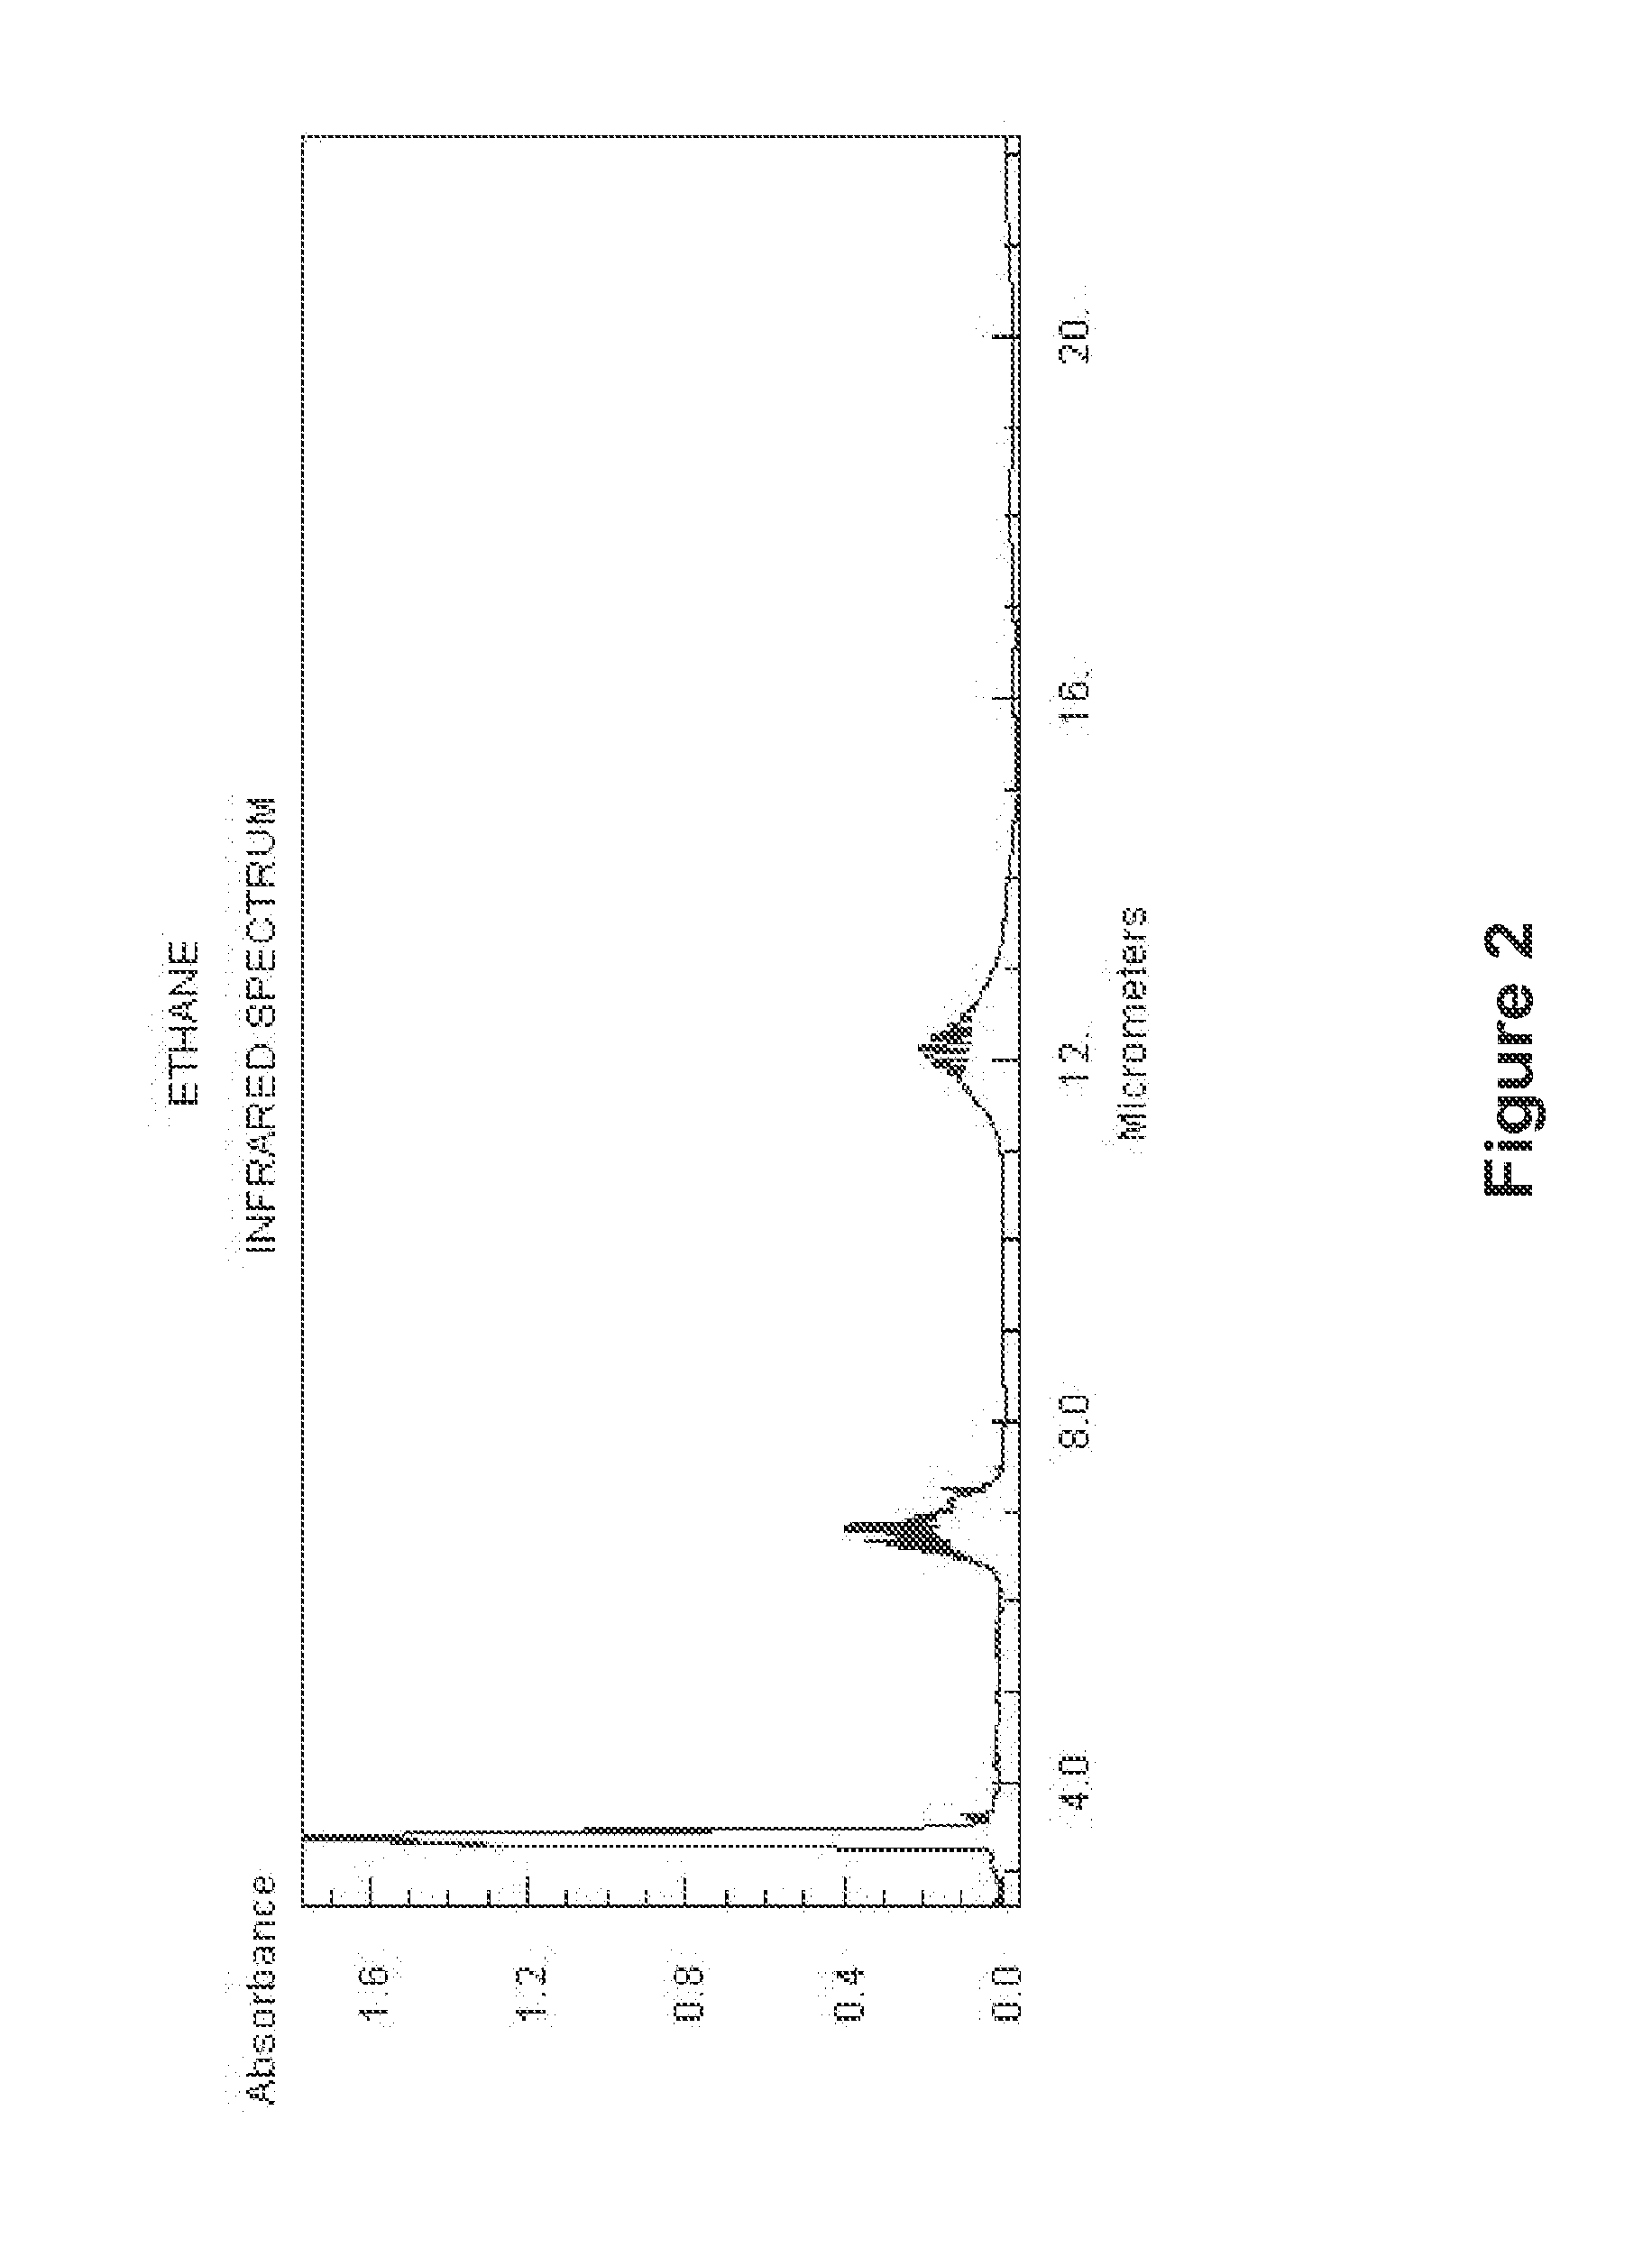 Method, device and system for determining the presence of volatile organic and hazardous vapors using an infrared light source and infrared video imaging